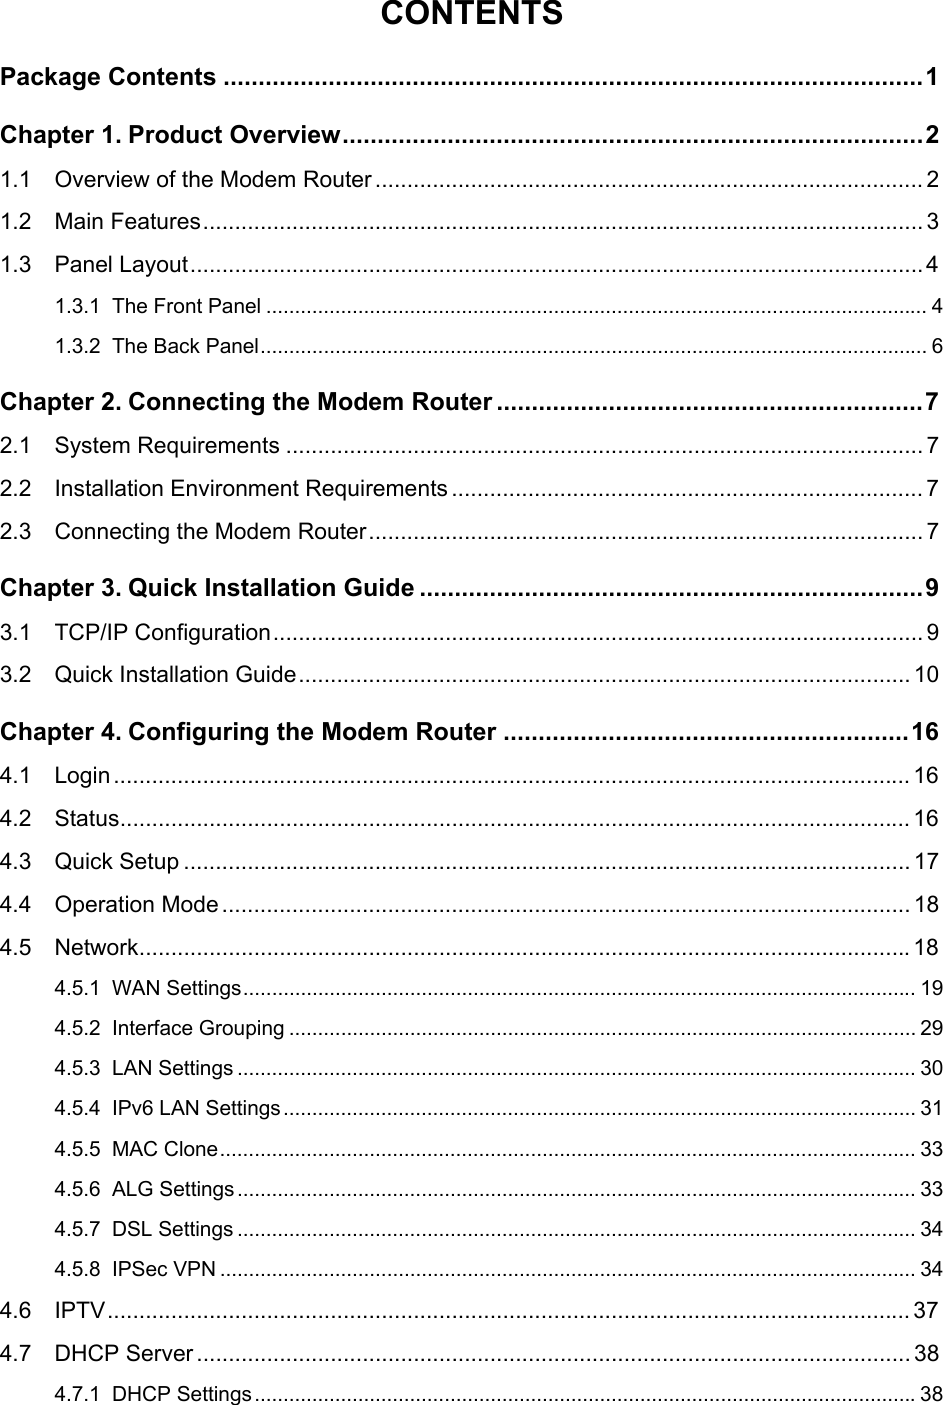  CONTENTS Package Contents ....................................................................................................1 Chapter 1. Product Overview...................................................................................2 1.1 Overview of the Modem Router ...................................................................................... 2 1.2 Main Features................................................................................................................. 3 1.3 Panel Layout...................................................................................................................4 1.3.1 The Front Panel ................................................................................................................... 4 1.3.2 The Back Panel.................................................................................................................... 6 Chapter 2. Connecting the Modem Router .............................................................7 2.1 System Requirements .................................................................................................... 7 2.2 Installation Environment Requirements .......................................................................... 7 2.3 Connecting the Modem Router.......................................................................................7 Chapter 3. Quick Installation Guide ........................................................................9 3.1 TCP/IP Configuration...................................................................................................... 9 3.2 Quick Installation Guide................................................................................................ 10 Chapter 4. Configuring the Modem Router ..........................................................16 4.1 Login............................................................................................................................. 16 4.2 Status............................................................................................................................ 16 4.3 Quick Setup ..................................................................................................................17 4.4 Operation Mode............................................................................................................ 18 4.5 Network.........................................................................................................................18 4.5.1 WAN Settings..................................................................................................................... 19 4.5.2 Interface Grouping ............................................................................................................. 29 4.5.3 LAN Settings ...................................................................................................................... 30 4.5.4 IPv6 LAN Settings.............................................................................................................. 31 4.5.5 MAC Clone......................................................................................................................... 33 4.5.6 ALG Settings...................................................................................................................... 33 4.5.7 DSL Settings ...................................................................................................................... 34 4.5.8 IPSec VPN ......................................................................................................................... 34 4.6 IPTV.............................................................................................................................. 37 4.7 DHCP Server................................................................................................................38 4.7.1 DHCP Settings...................................................................................................................38  